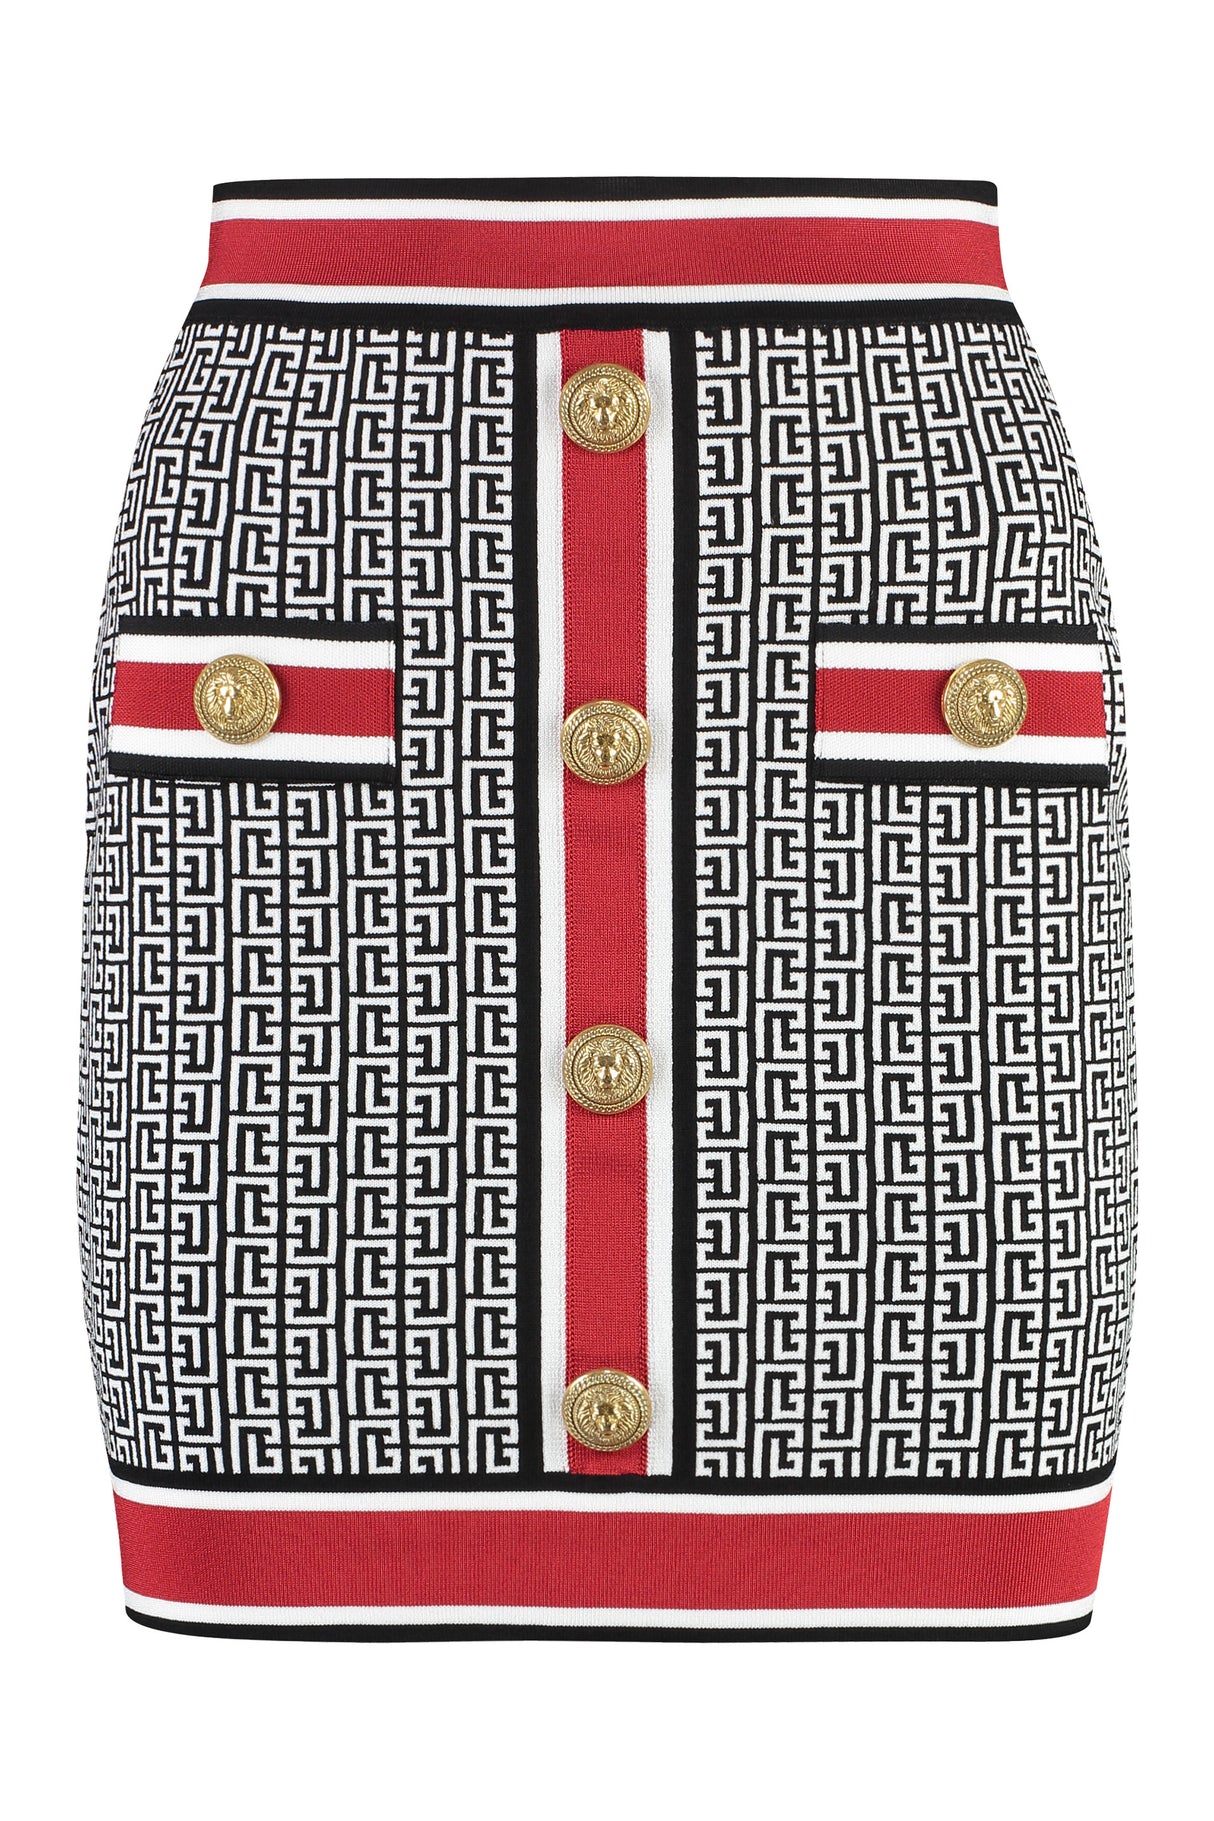 BALMAIN White Jacquard Knit Skirt with Embellished Buttons and Ribbed Edges - FW23 Skirt for Women